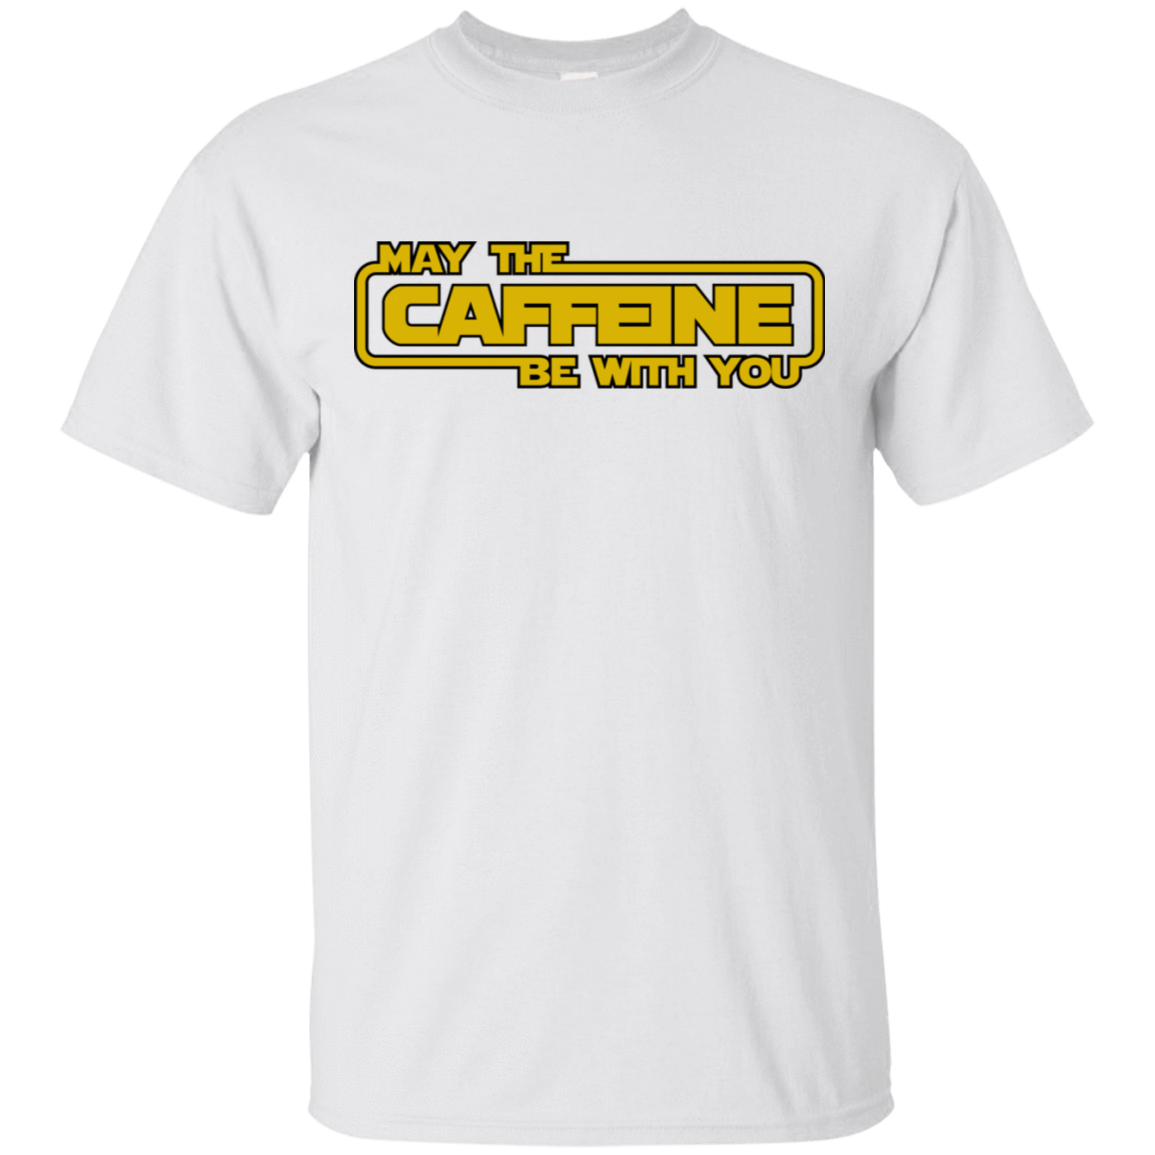 T-Shirts White / S May the Caffeine Be with You T-Shirt